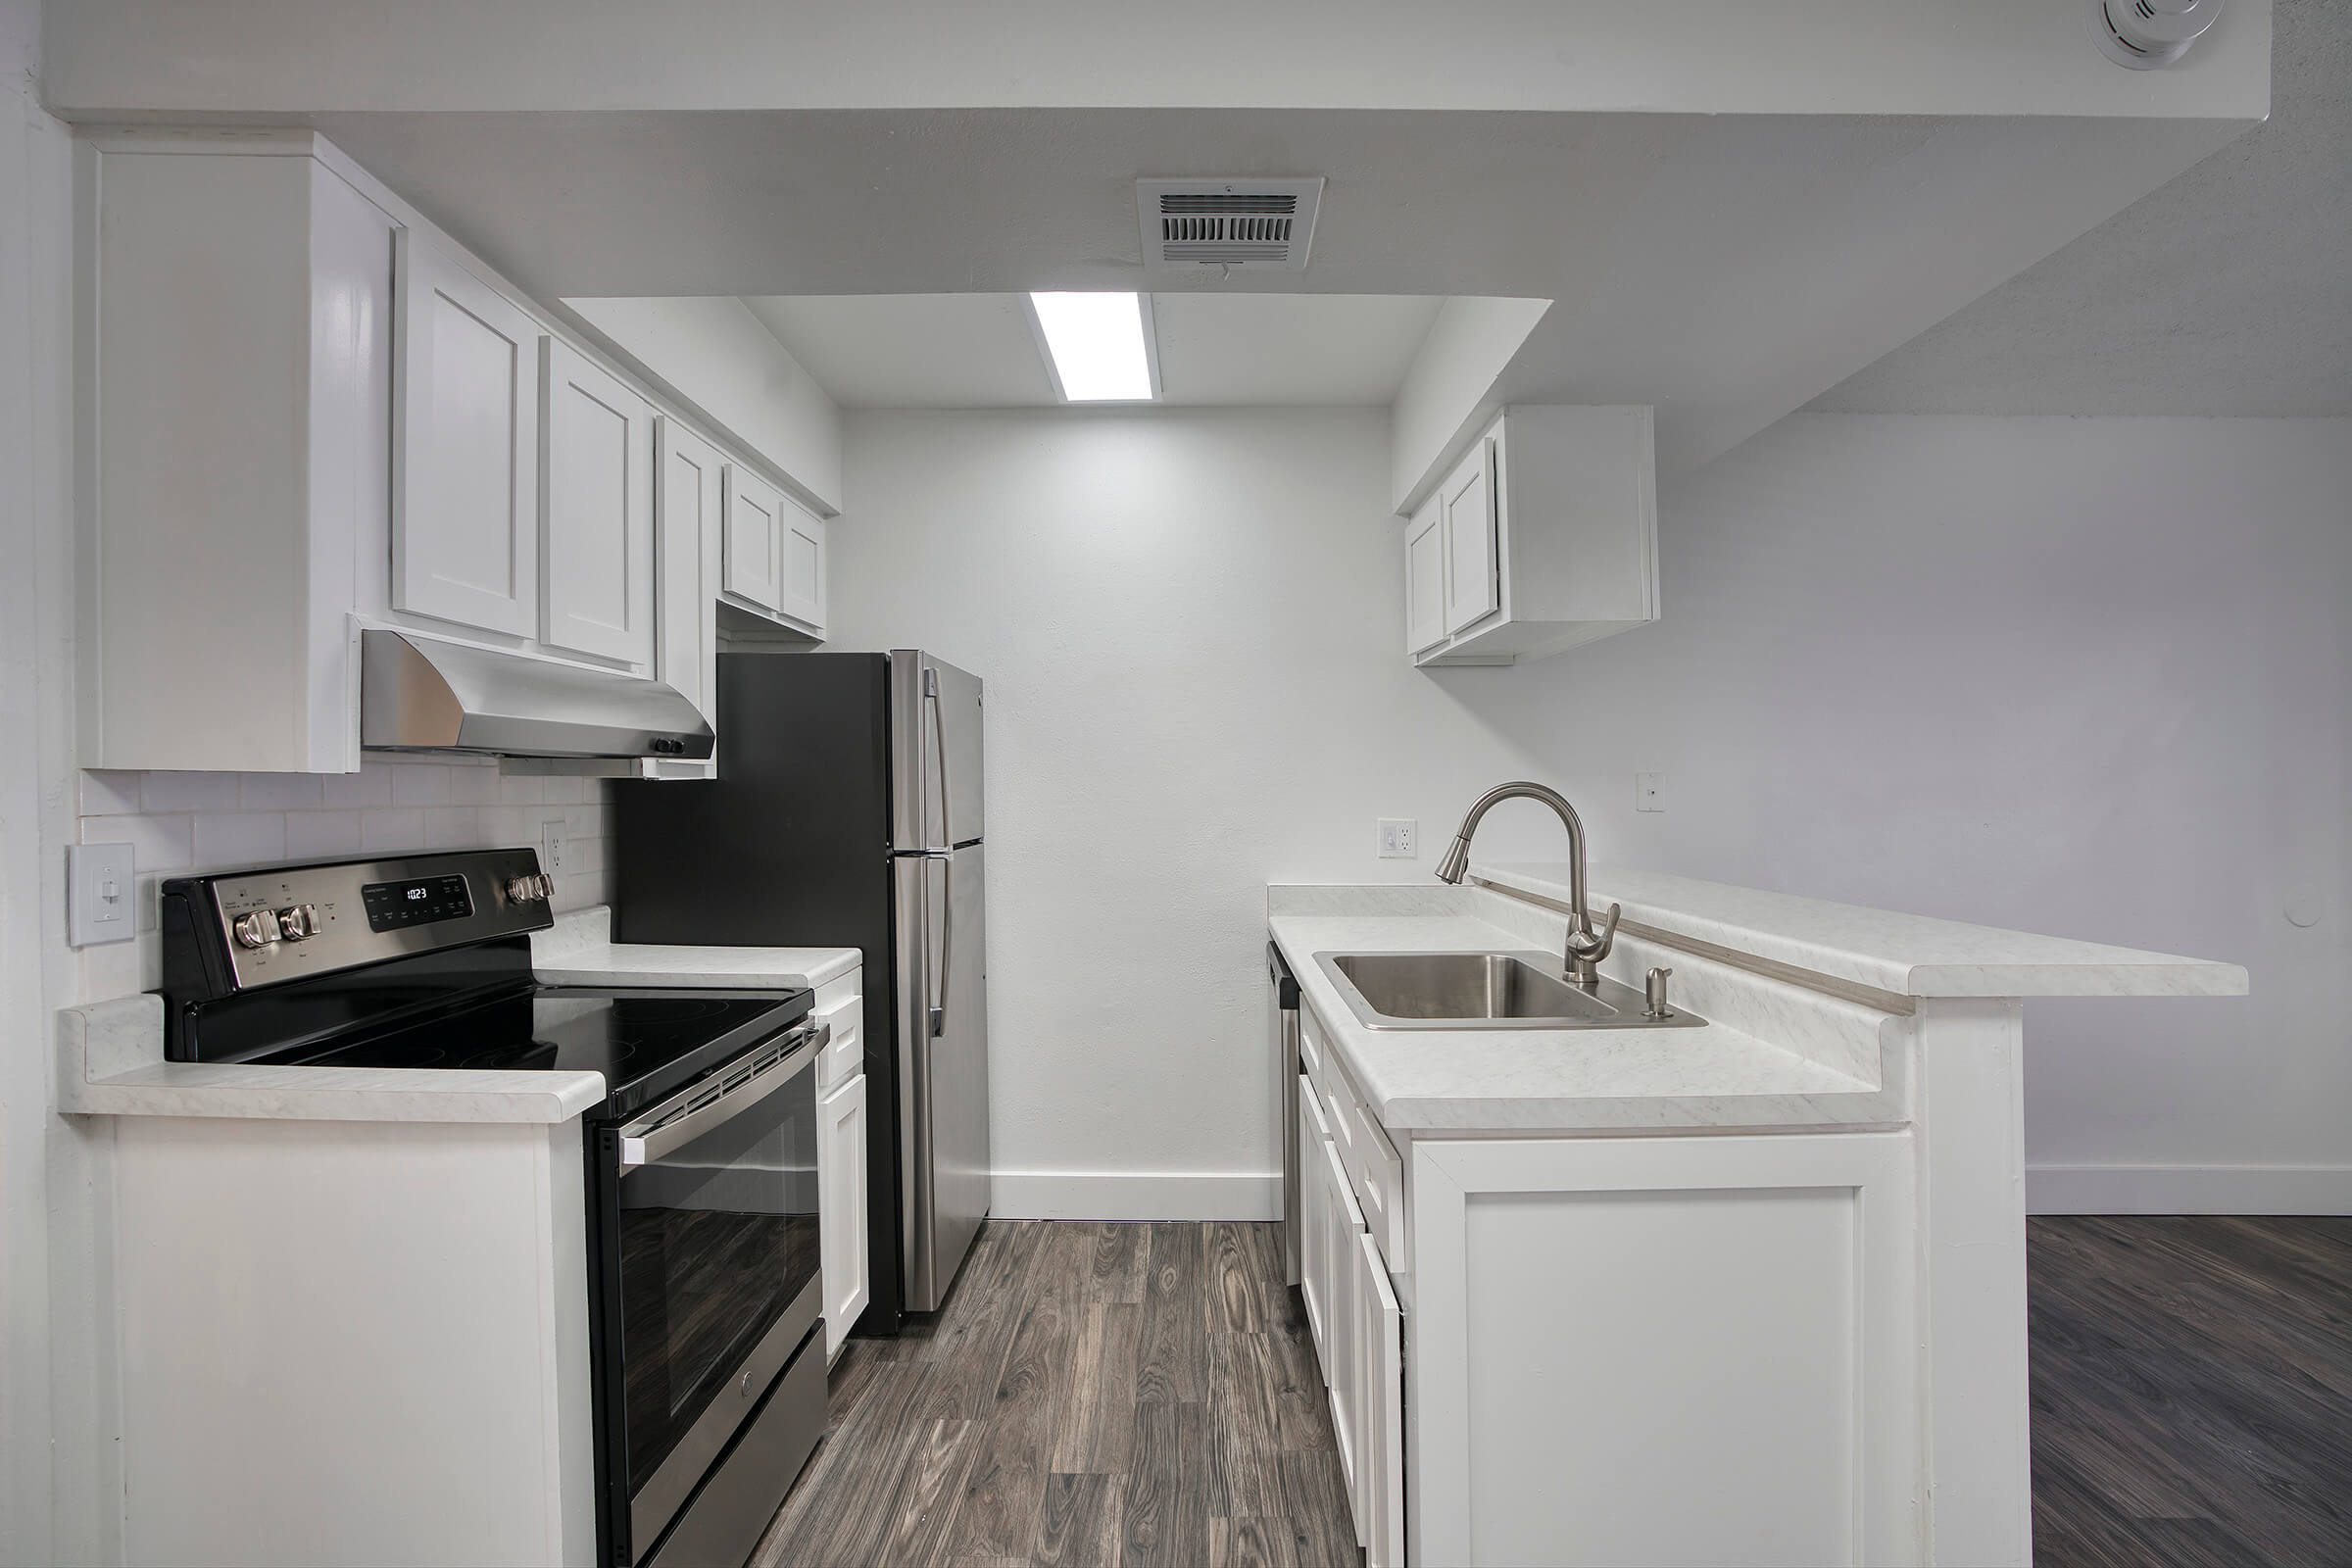 Renovated kitchen with white cabinets, stainless steel appliances, and a walk up kitchen island